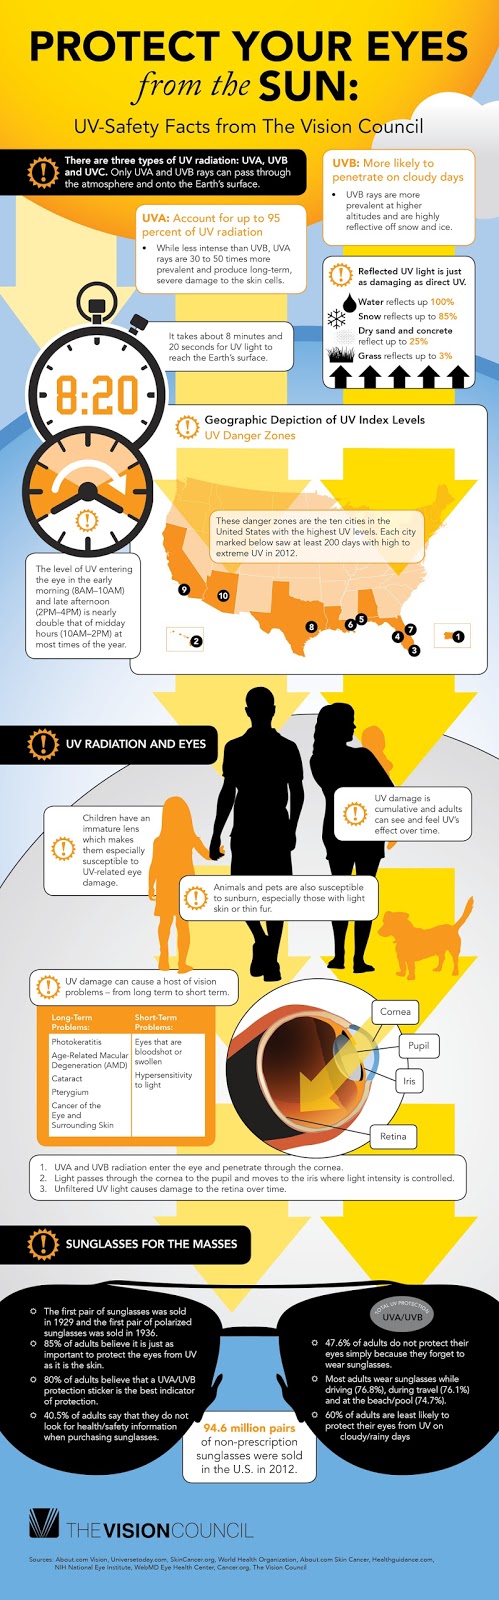 UV safety facts infographic from The Vision Council